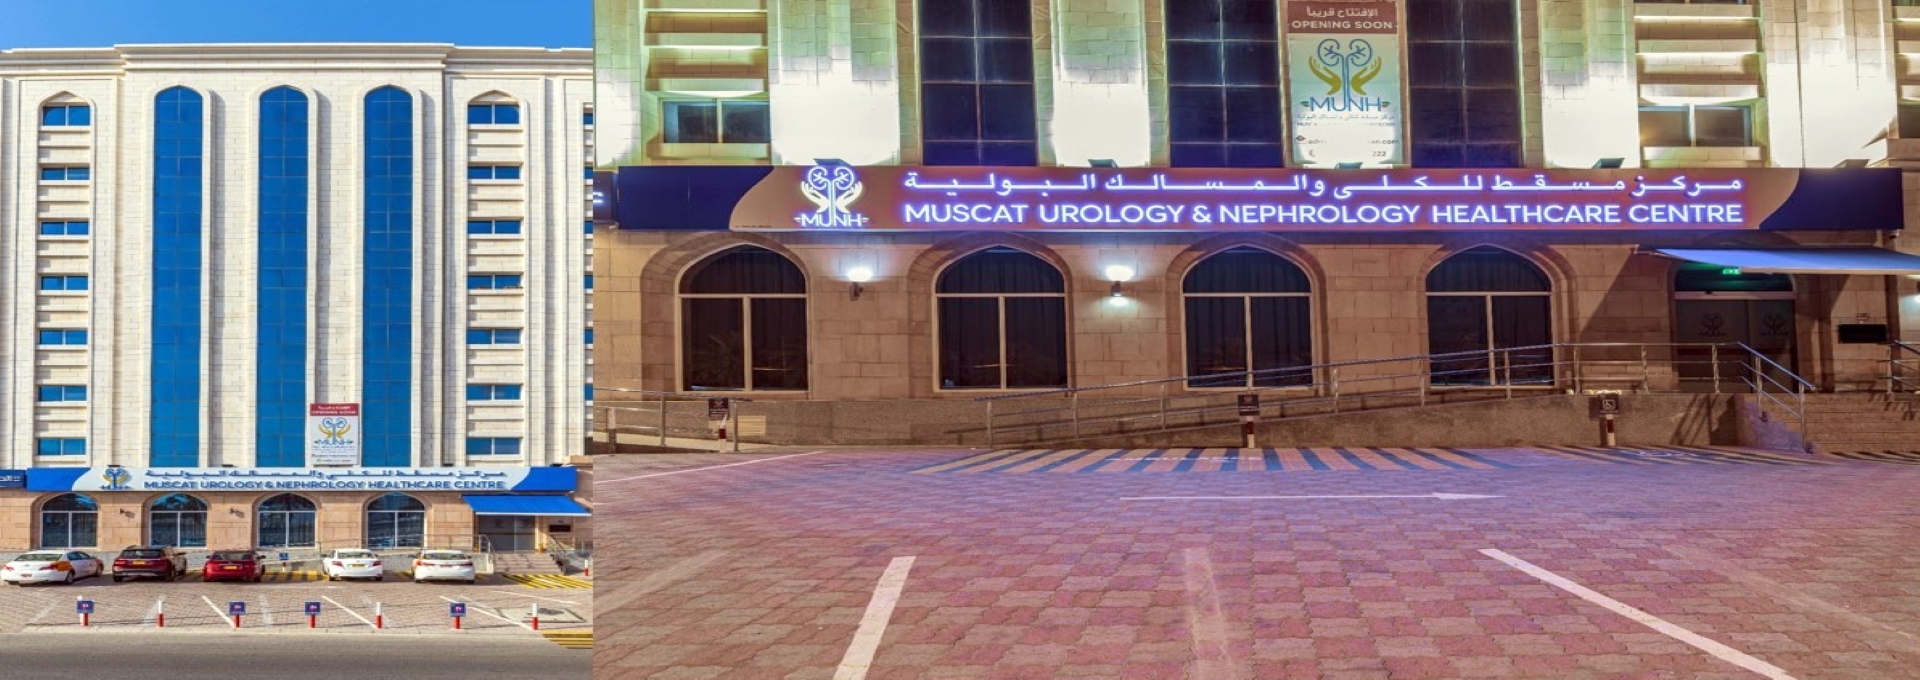 Muscat Urology and Nephrology Healthcare Centre